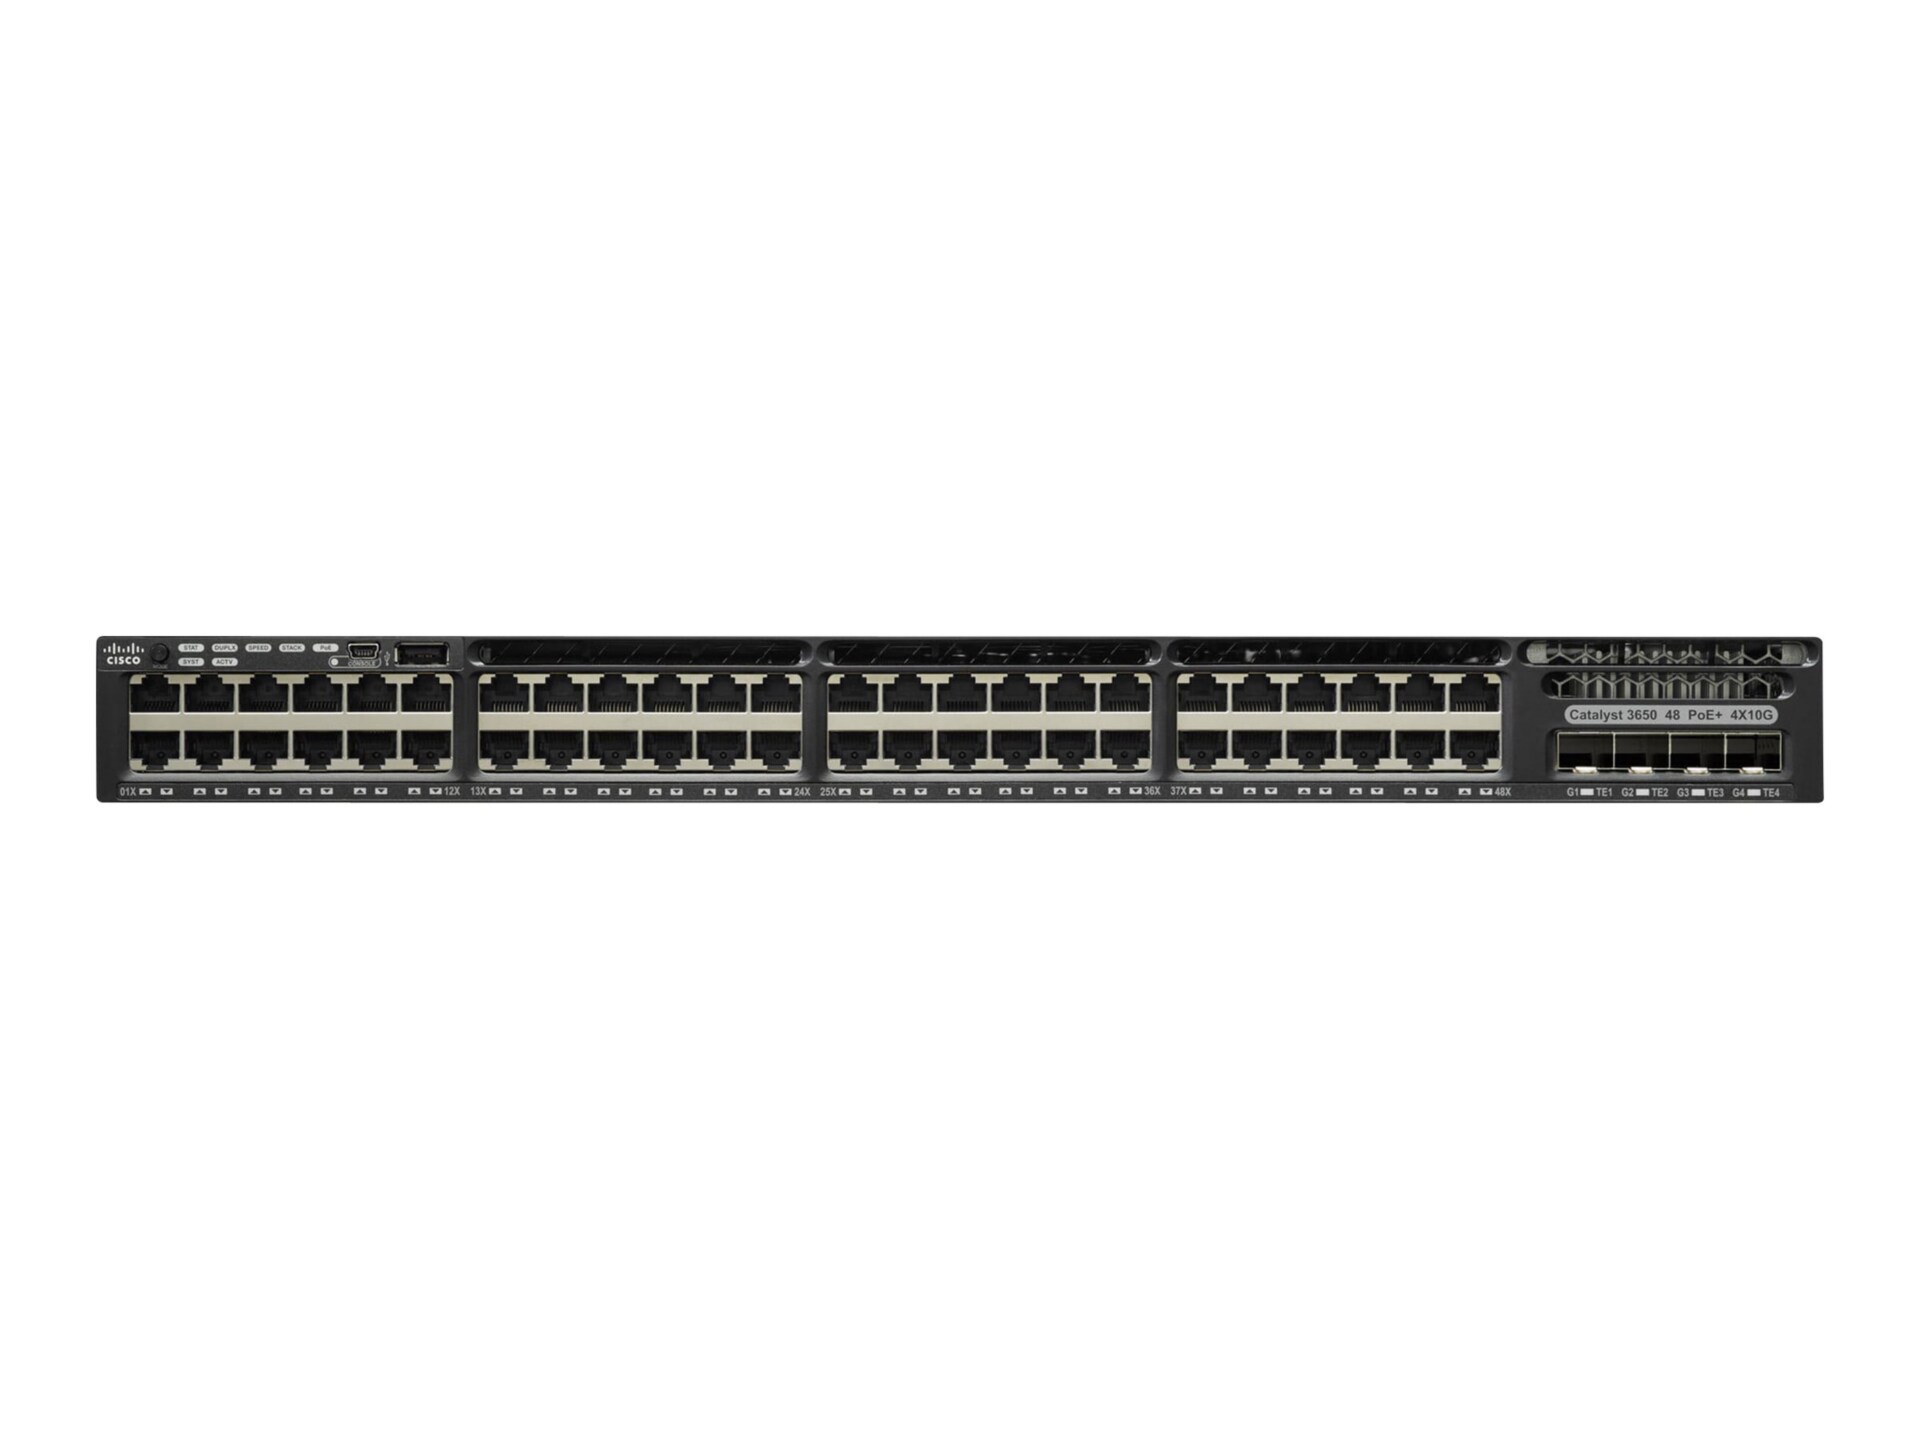 Cisco Catalyst 3650-48PS-L - switch - 48 ports - managed - rack-mountable